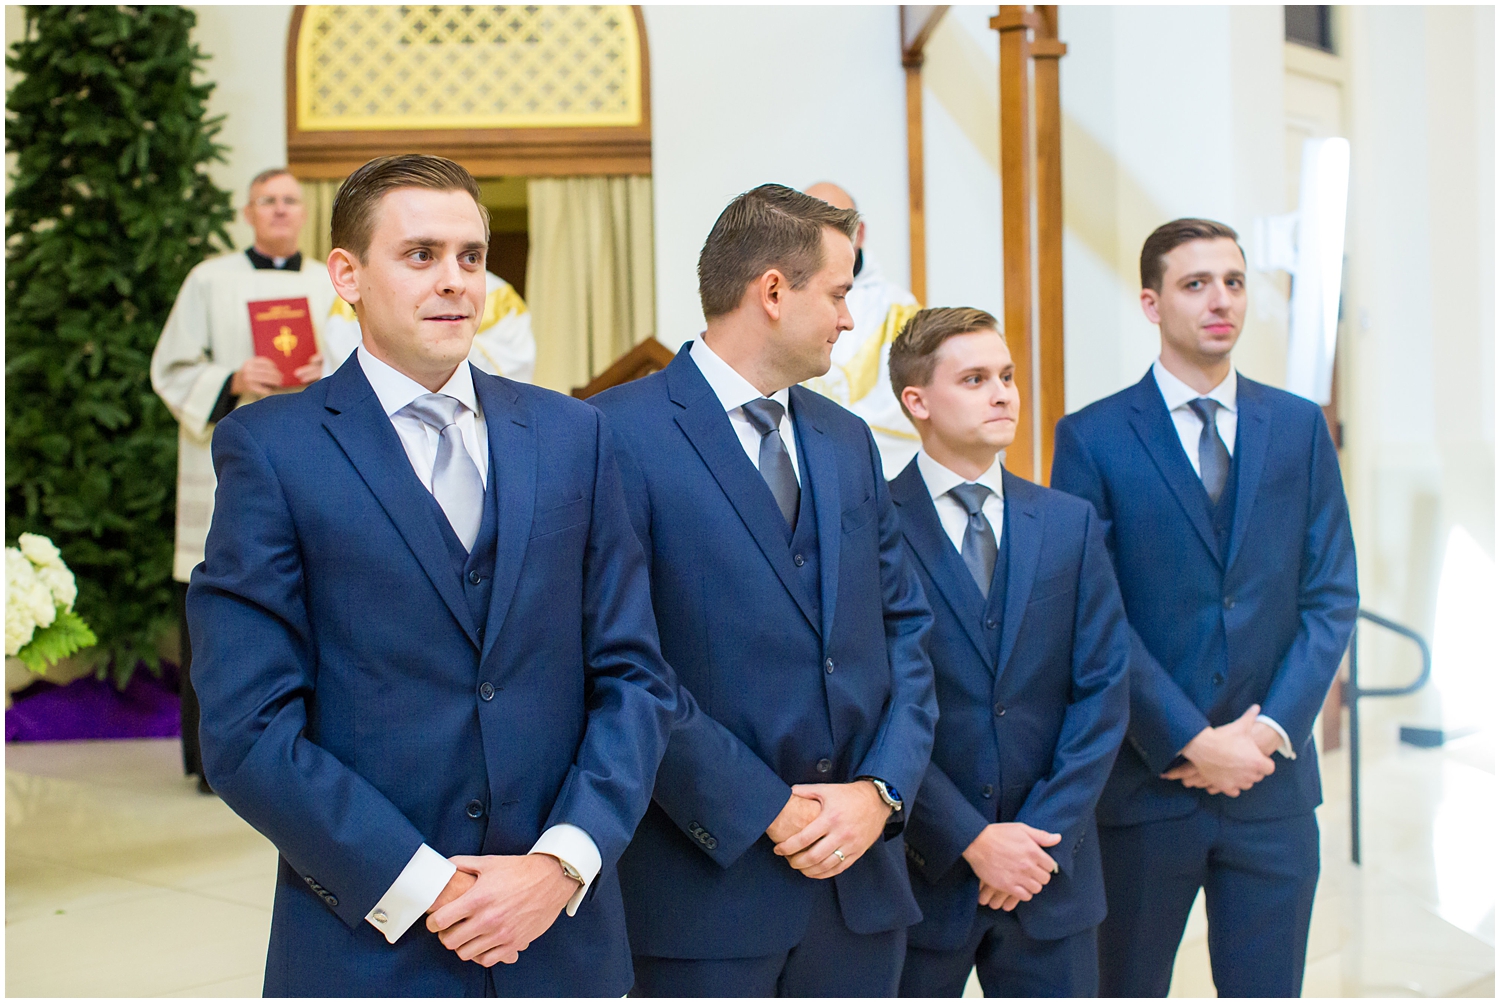 groom in navy blue suit with light blue tie waiting for bride to come down the aisle on wedding day